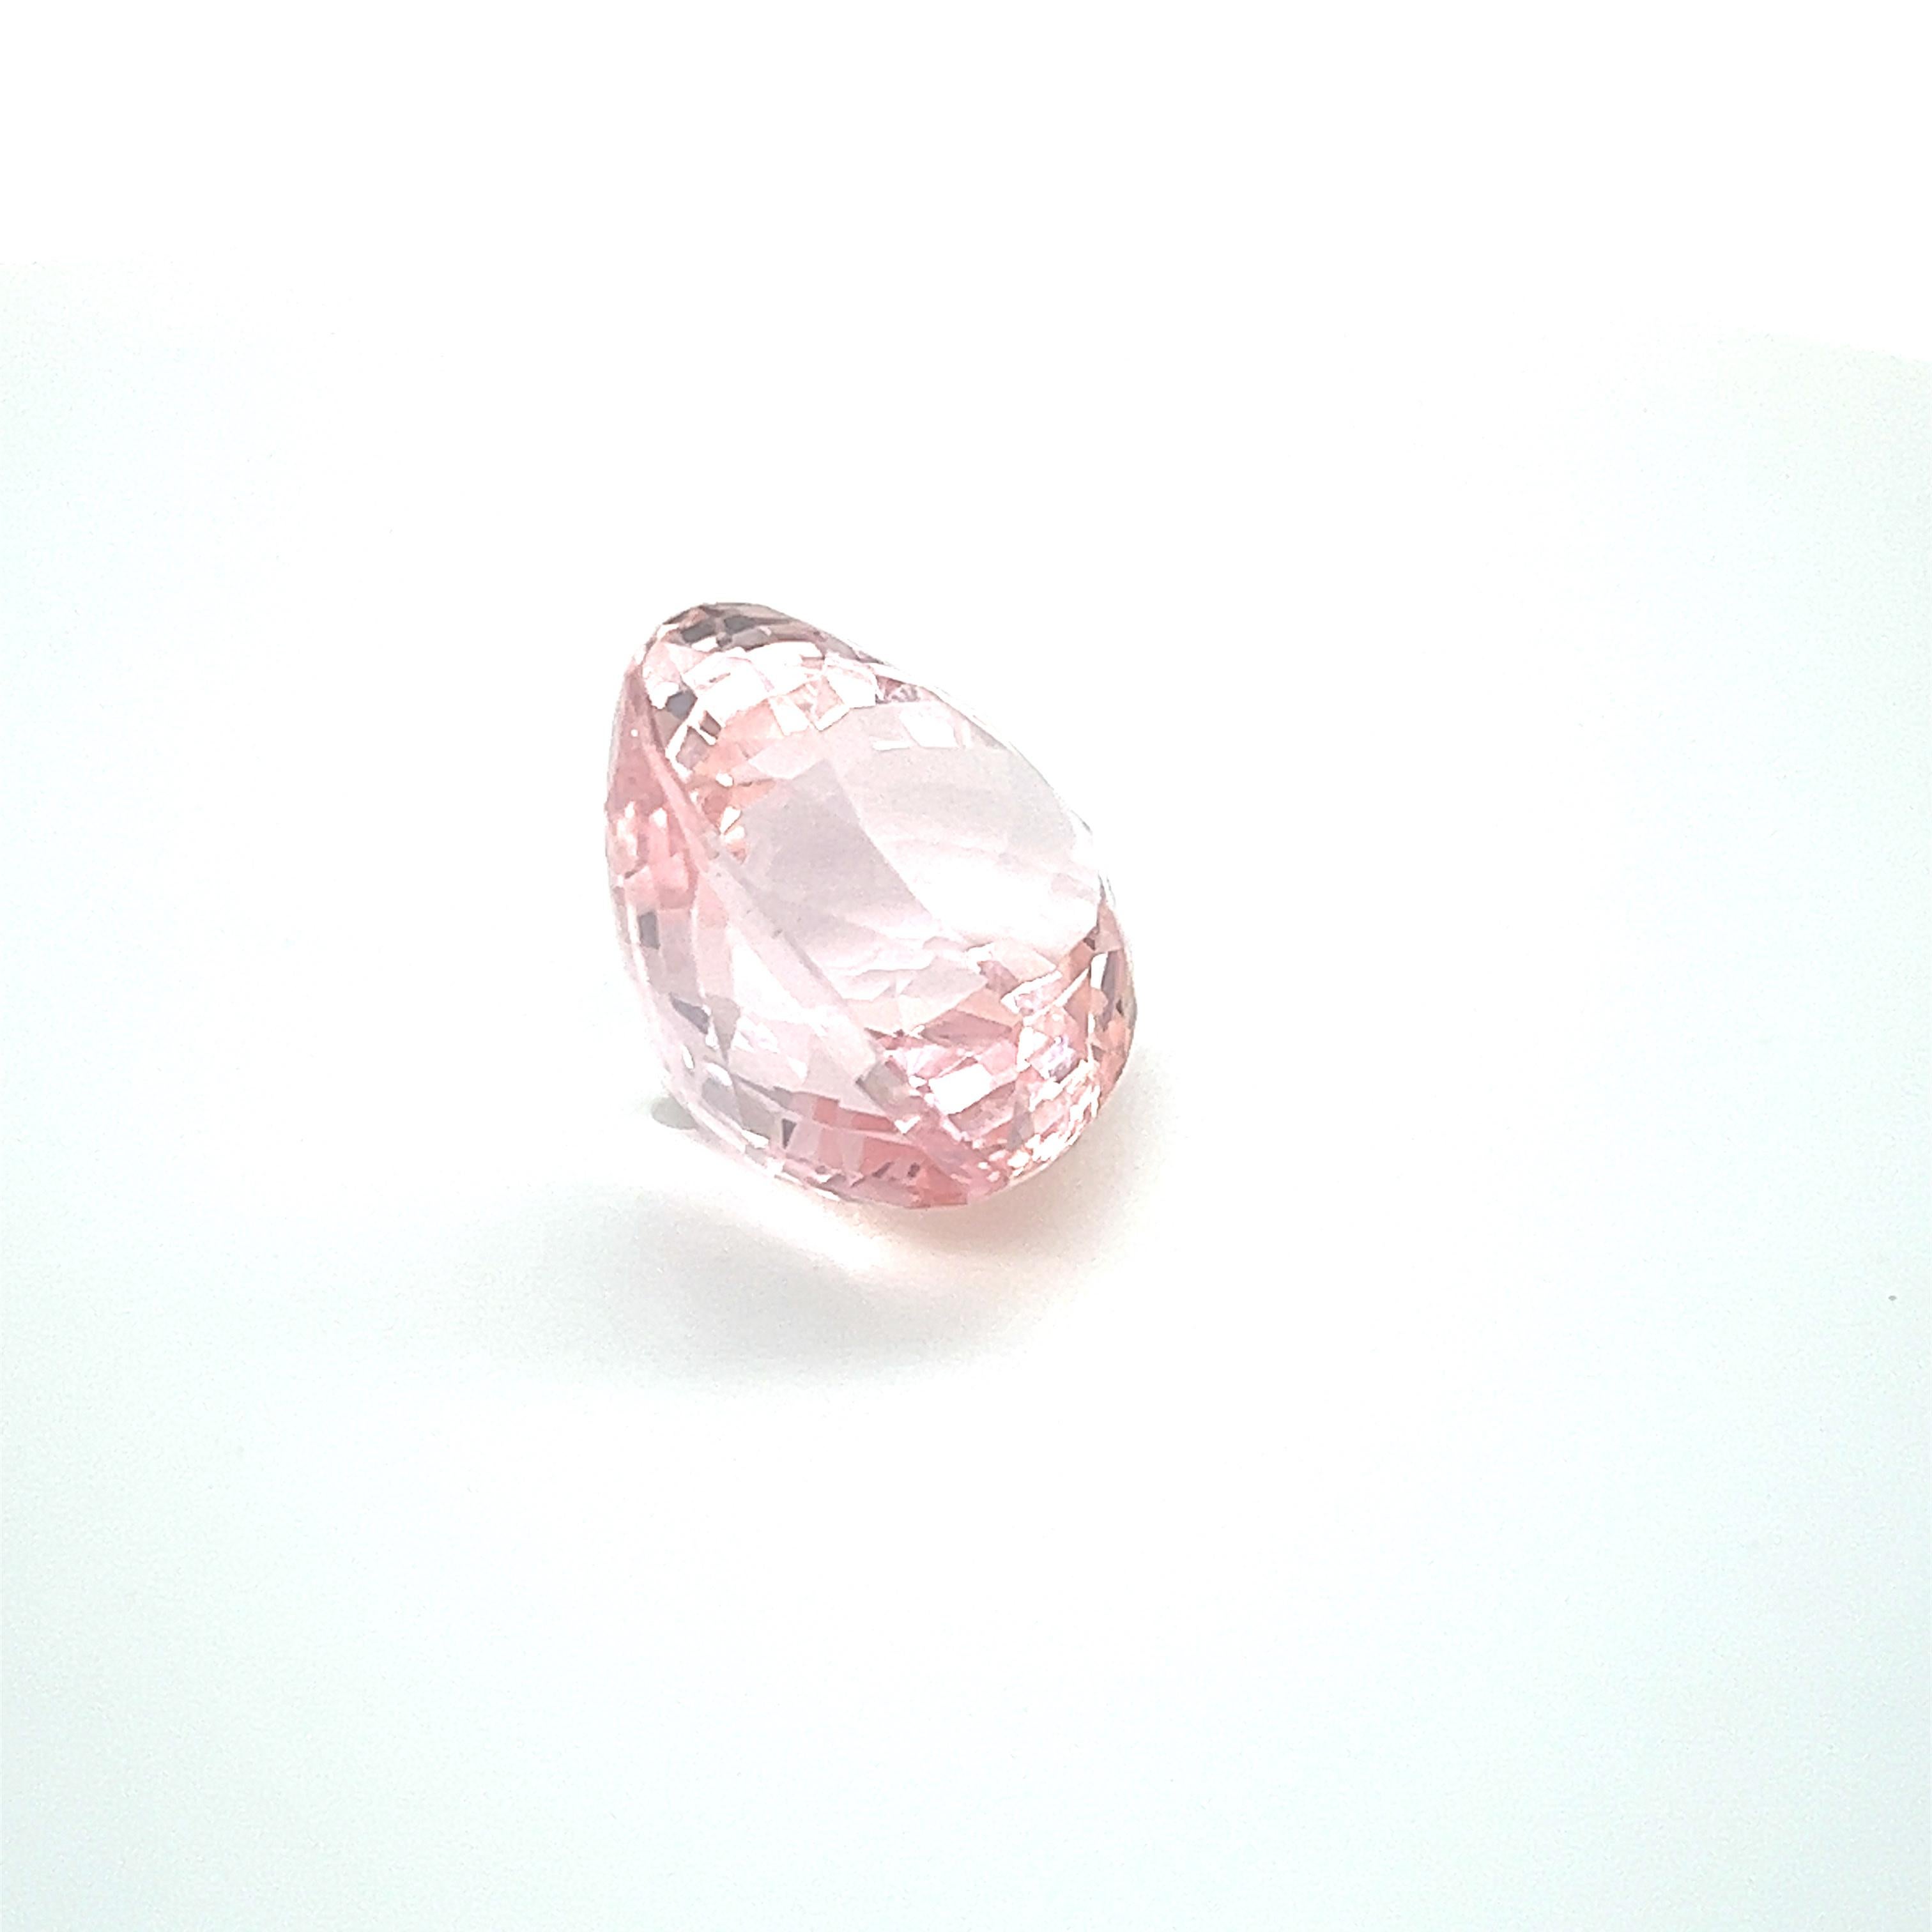 19.24 Carat AAA Natural Pink Morganite Heart Shape Loose Gemstone Jewelry In New Condition For Sale In New York, NY